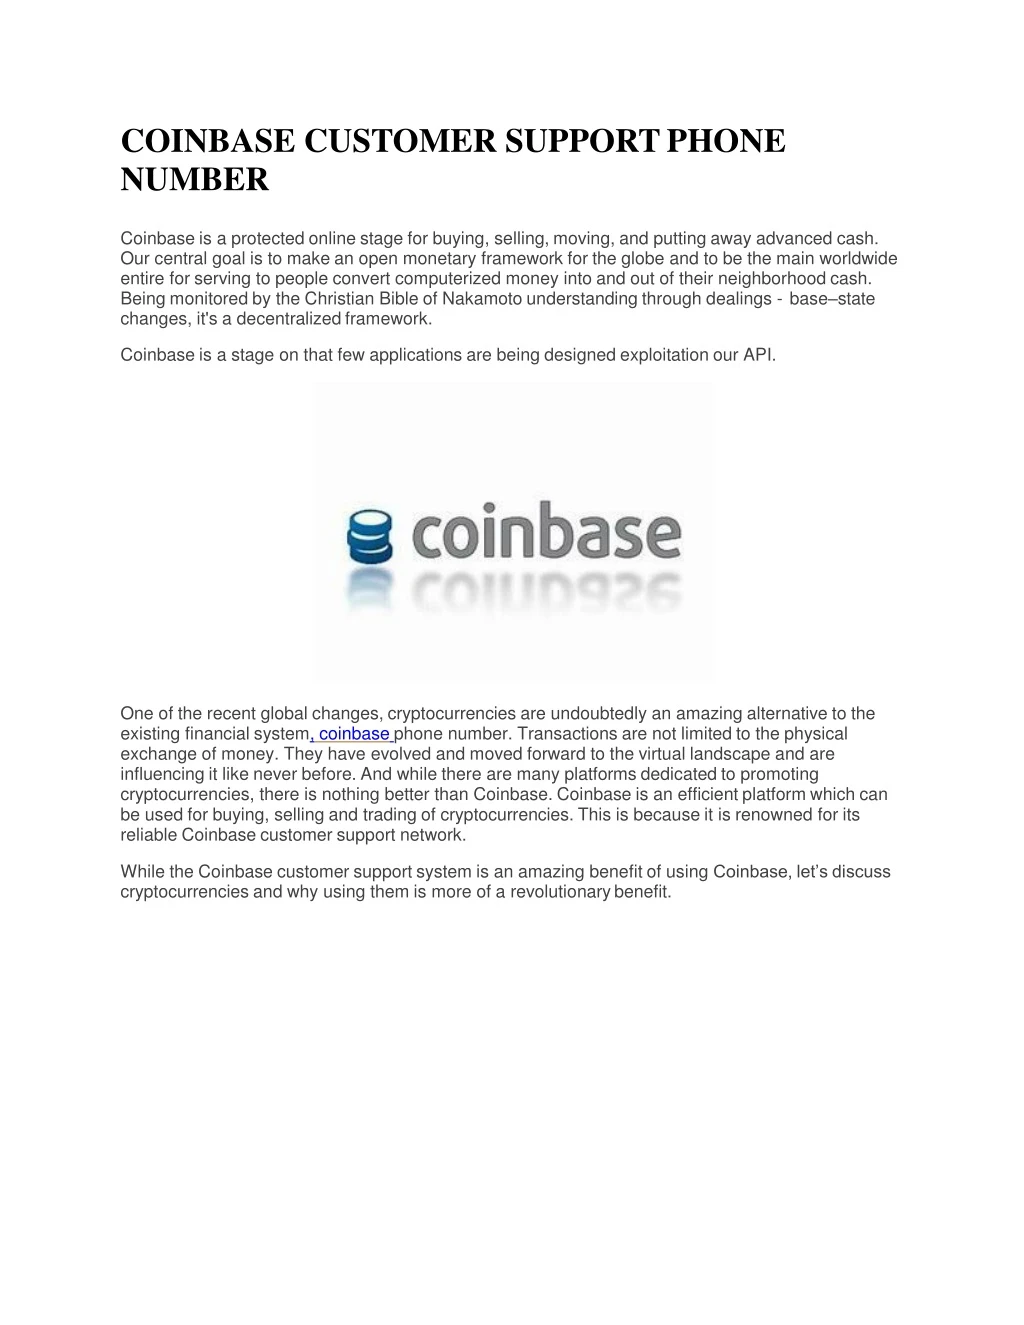 coinbase customer support phone number coinbase